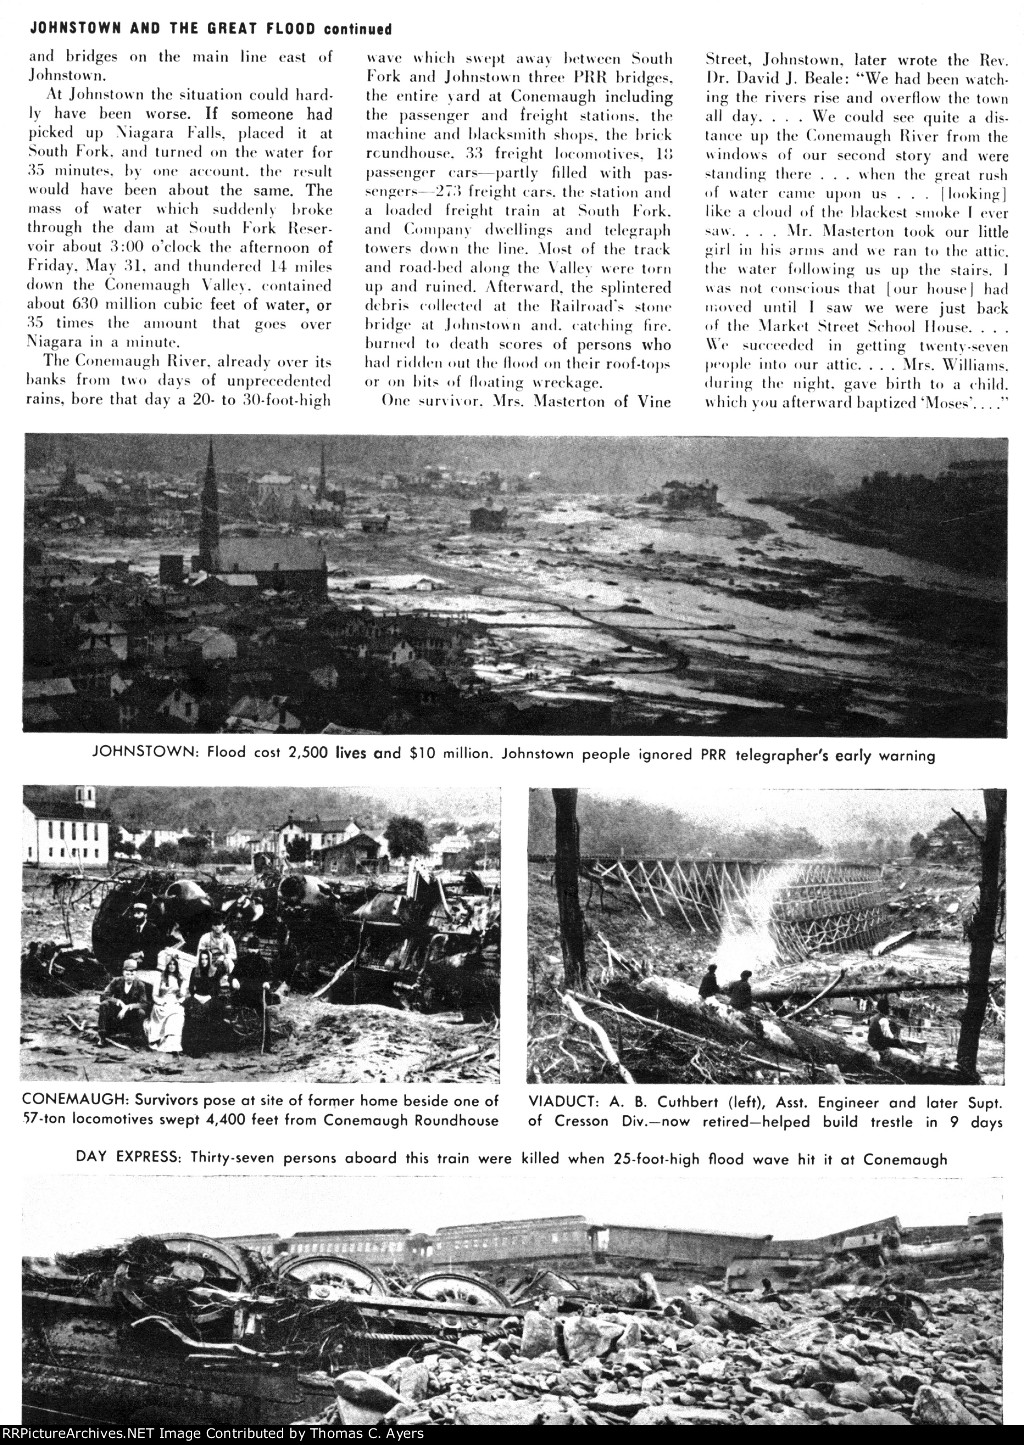 "The Great Flood," Page 6, 1953